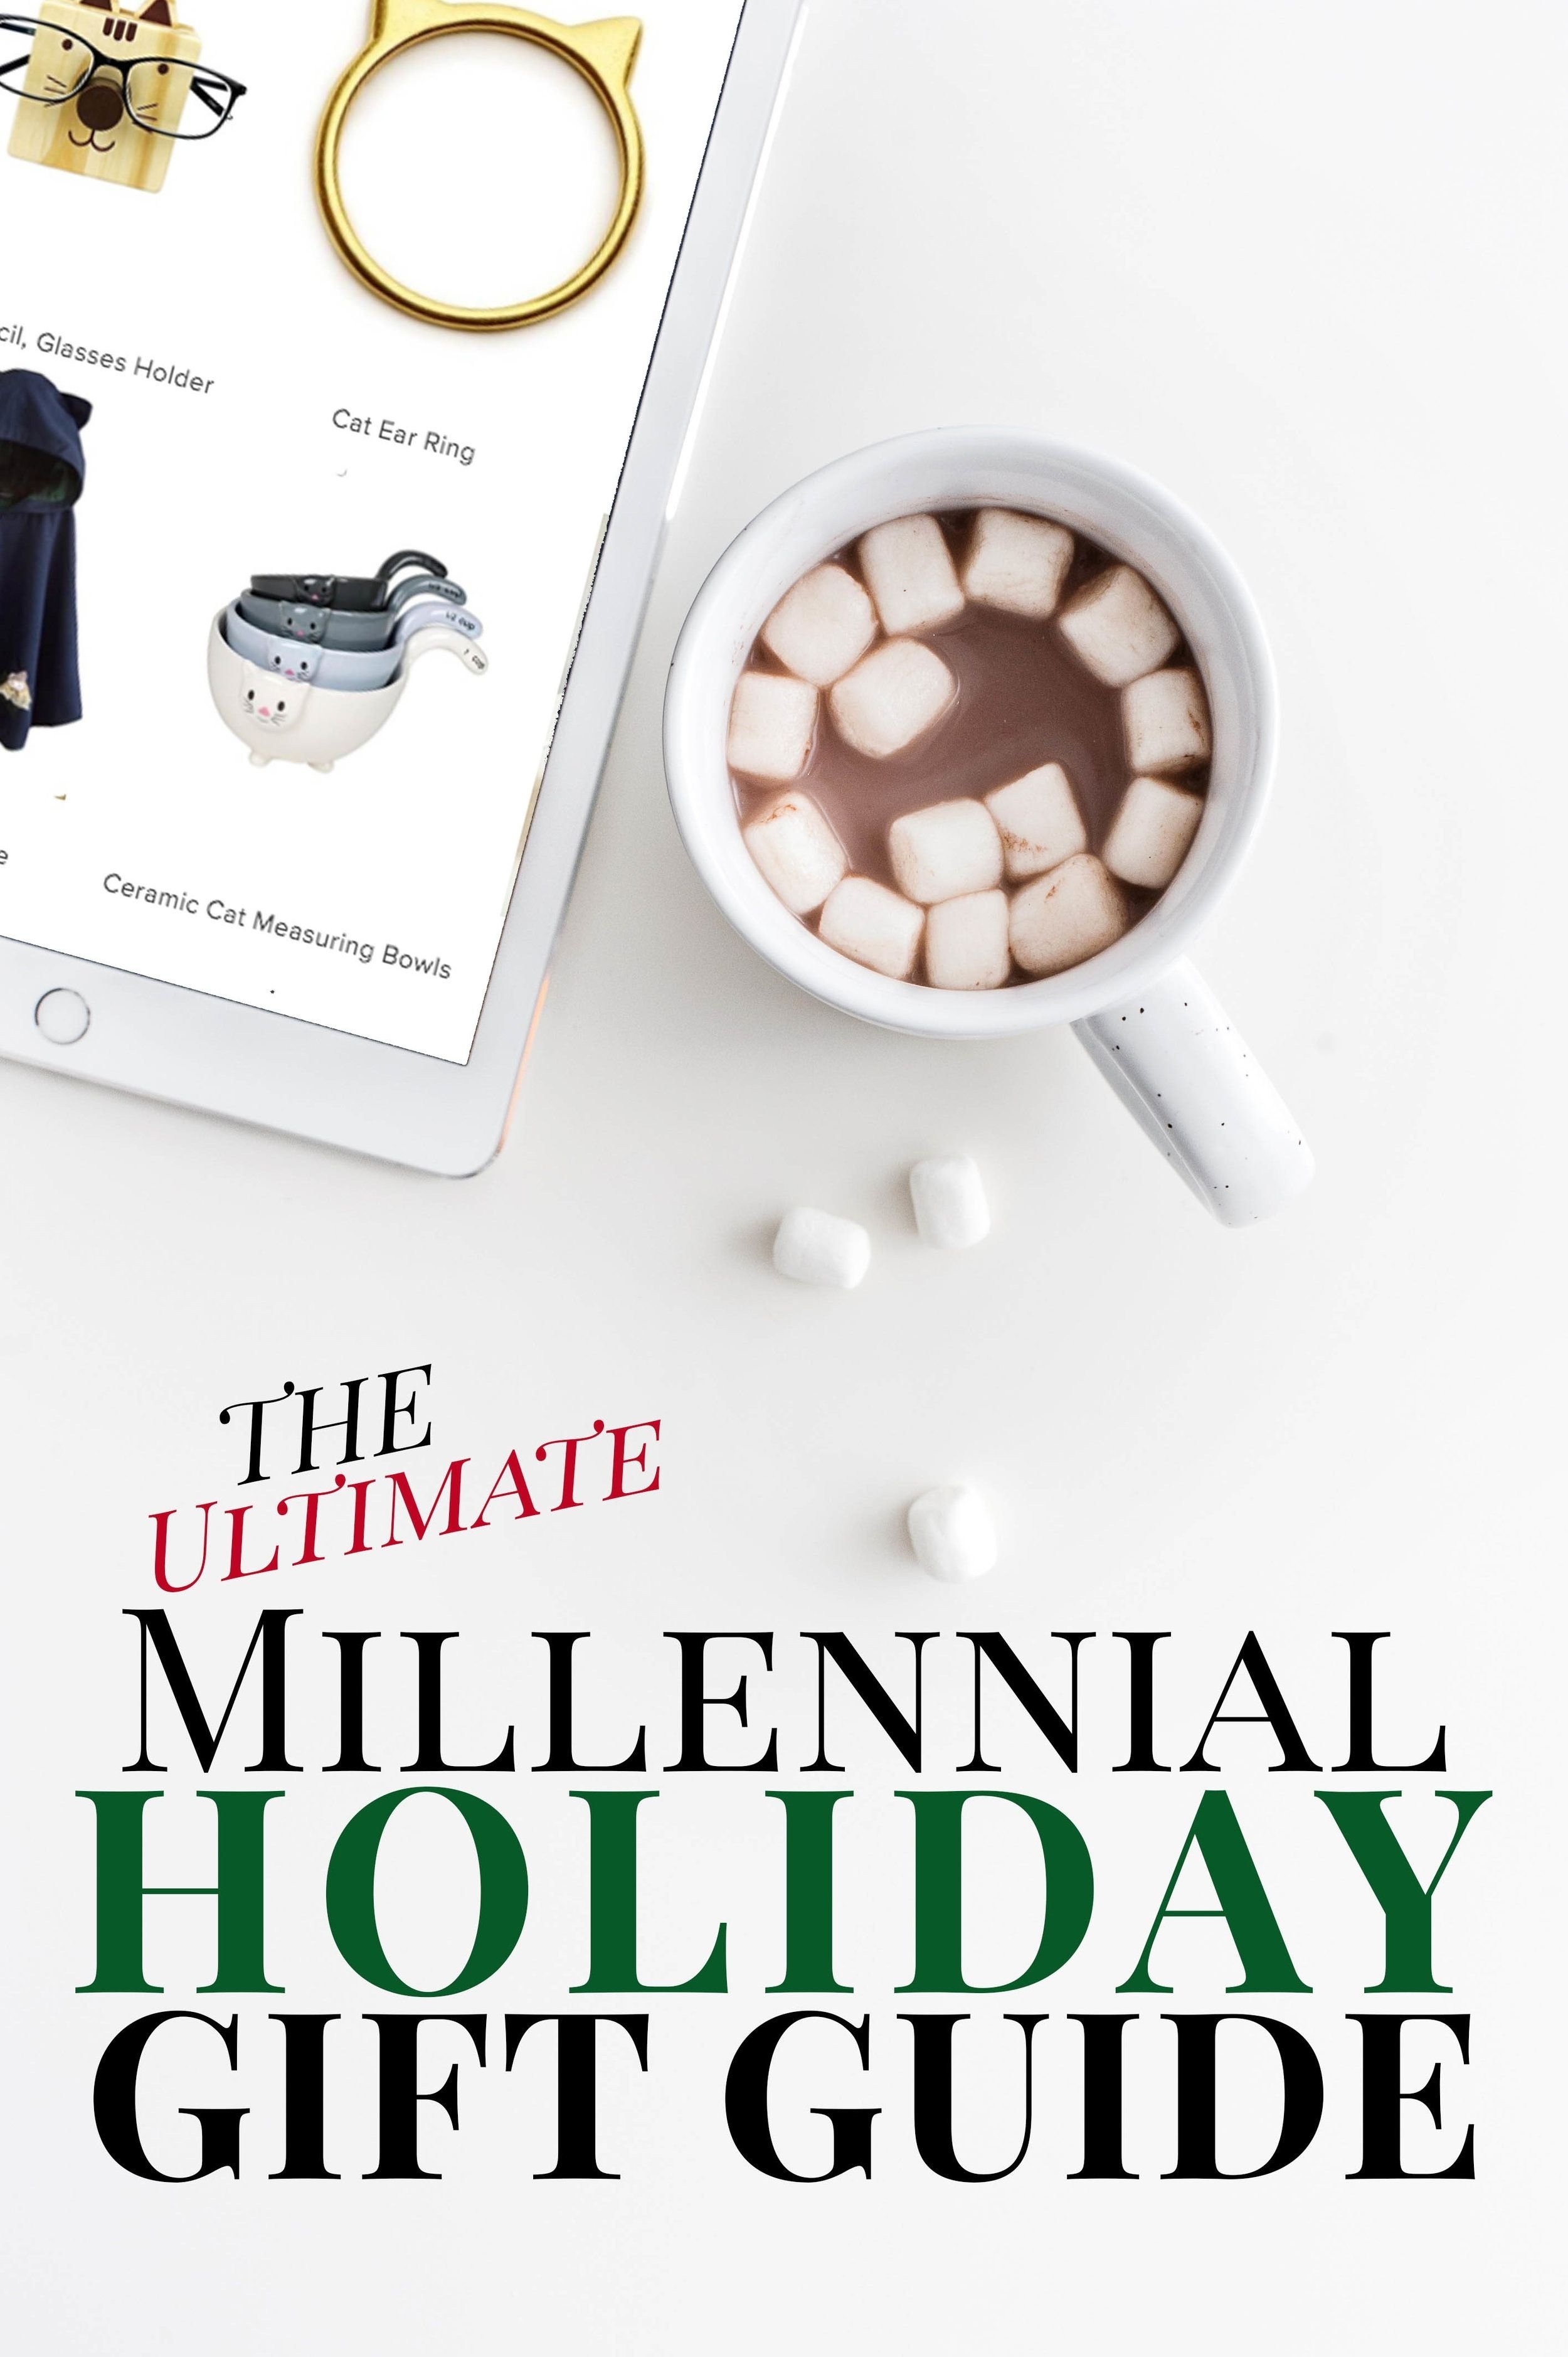 10 Most Recommended Christmas Gift Ideas For Newlyweds millennial holiday gift guide christmas gift ideas for millennials 1 2022